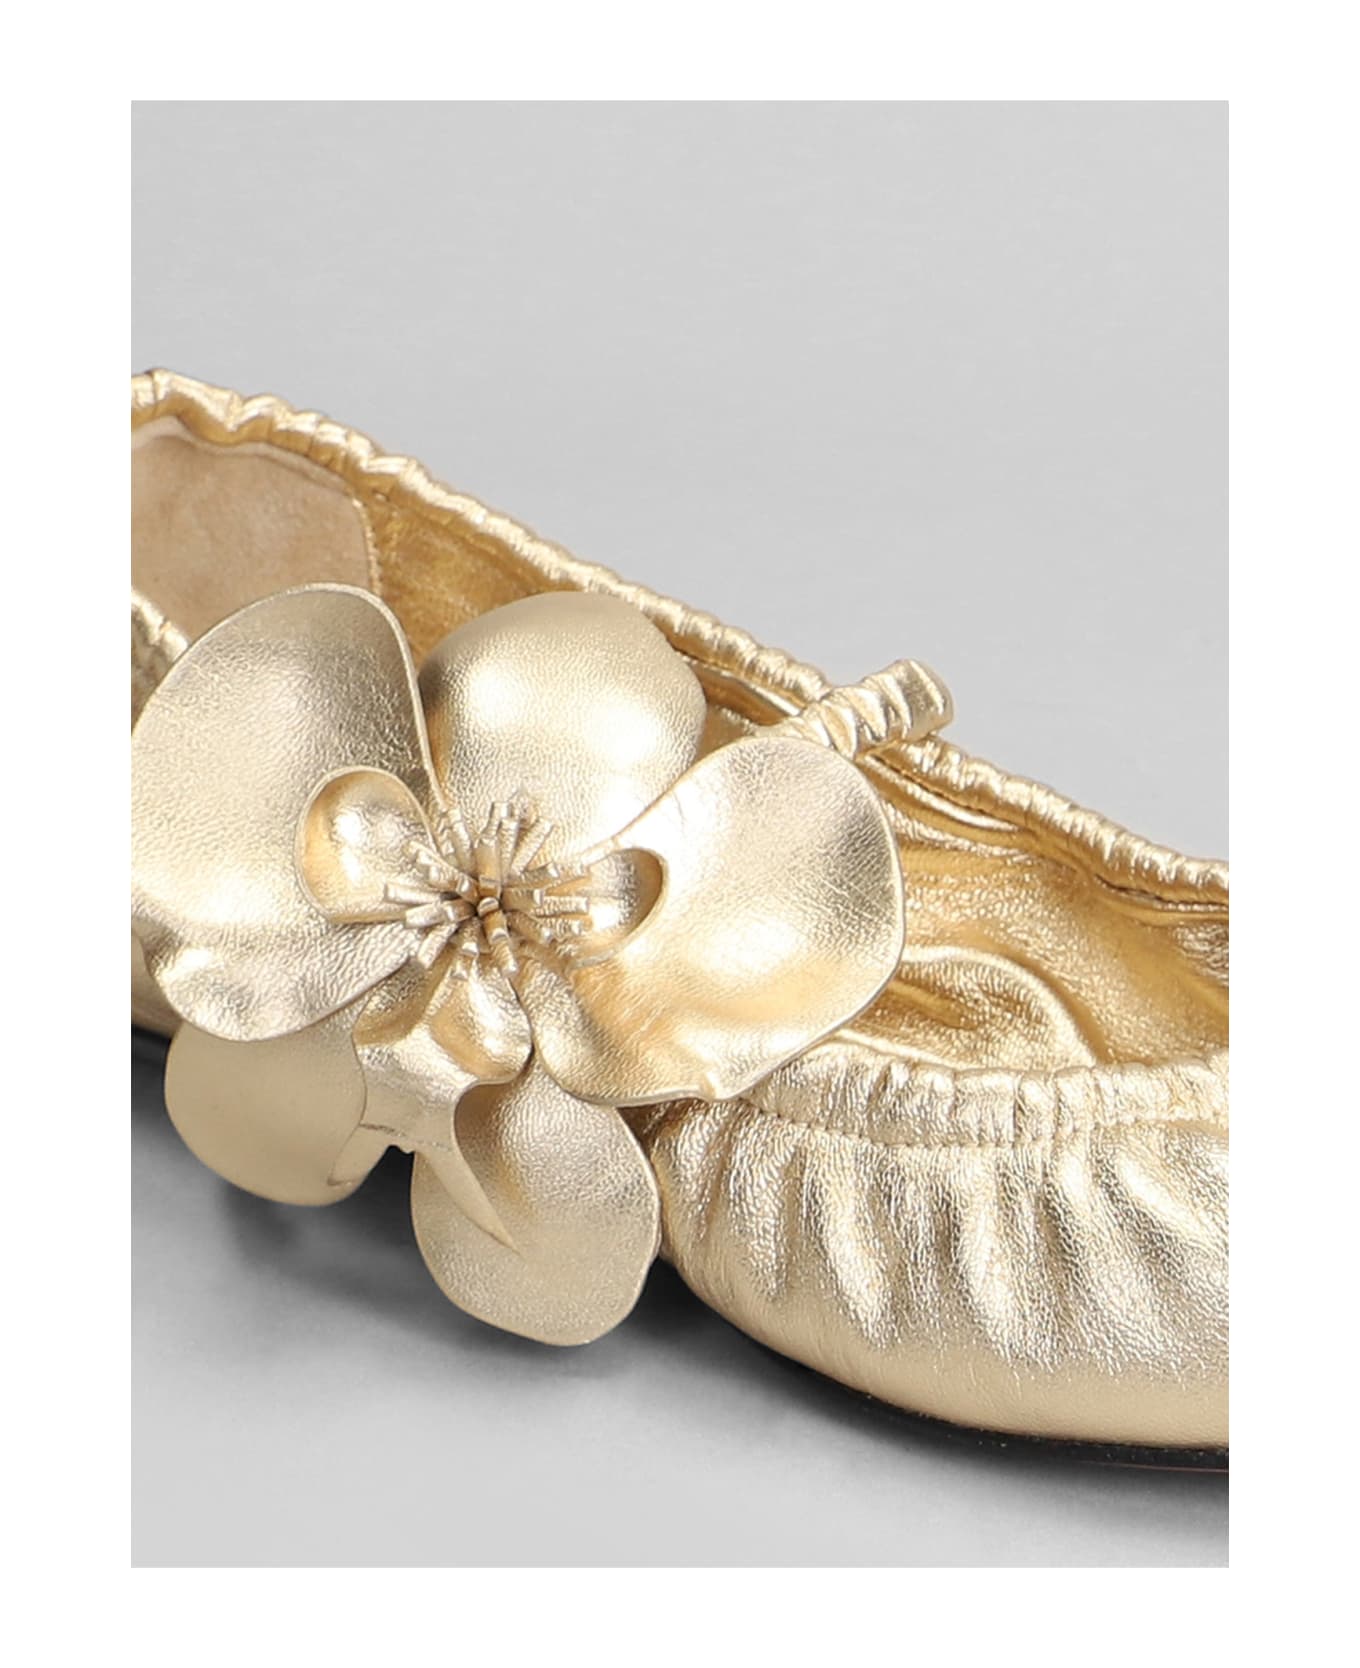 Zimmermann Ballet Flats In Gold Leather - gold